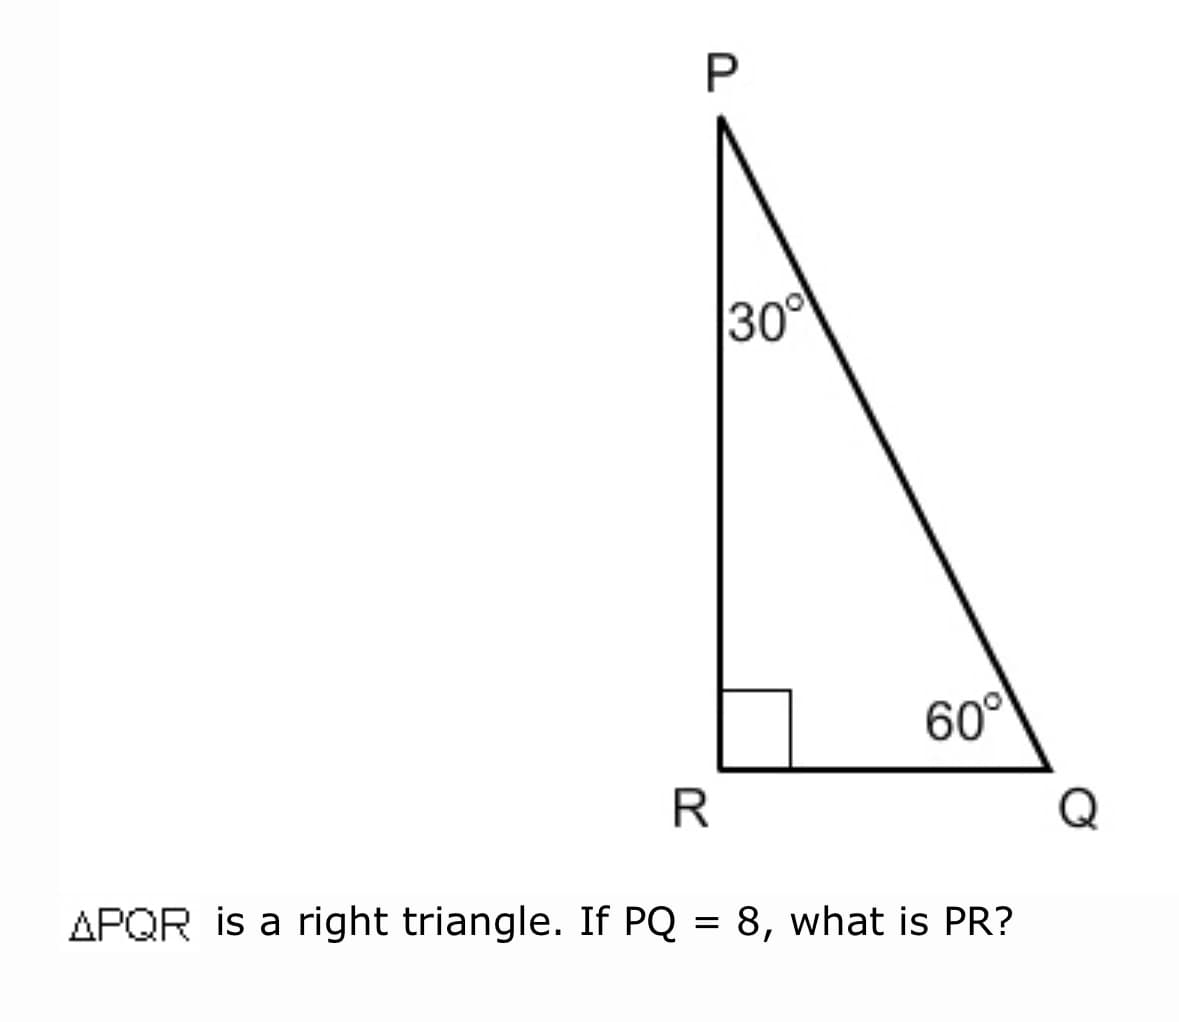 30
60°
R
Q
APQR is a right triangle. If PQ = 8, what is PR?
P.
